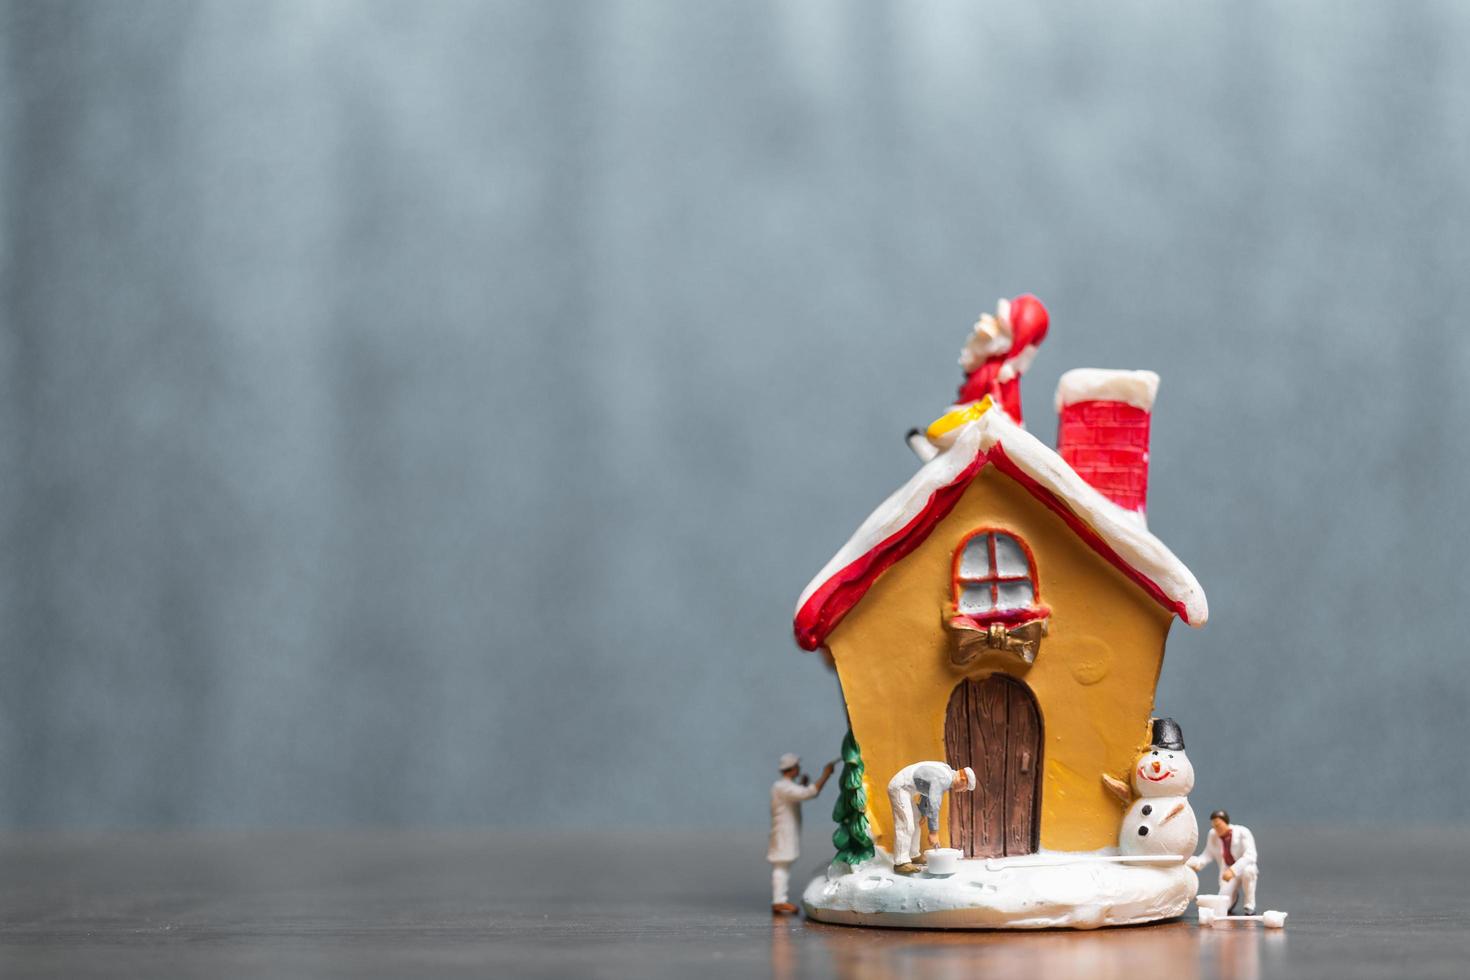 Miniature people painting a house and Santa Claus sitting on the roof, Merry Christmas and happy holidays concept photo